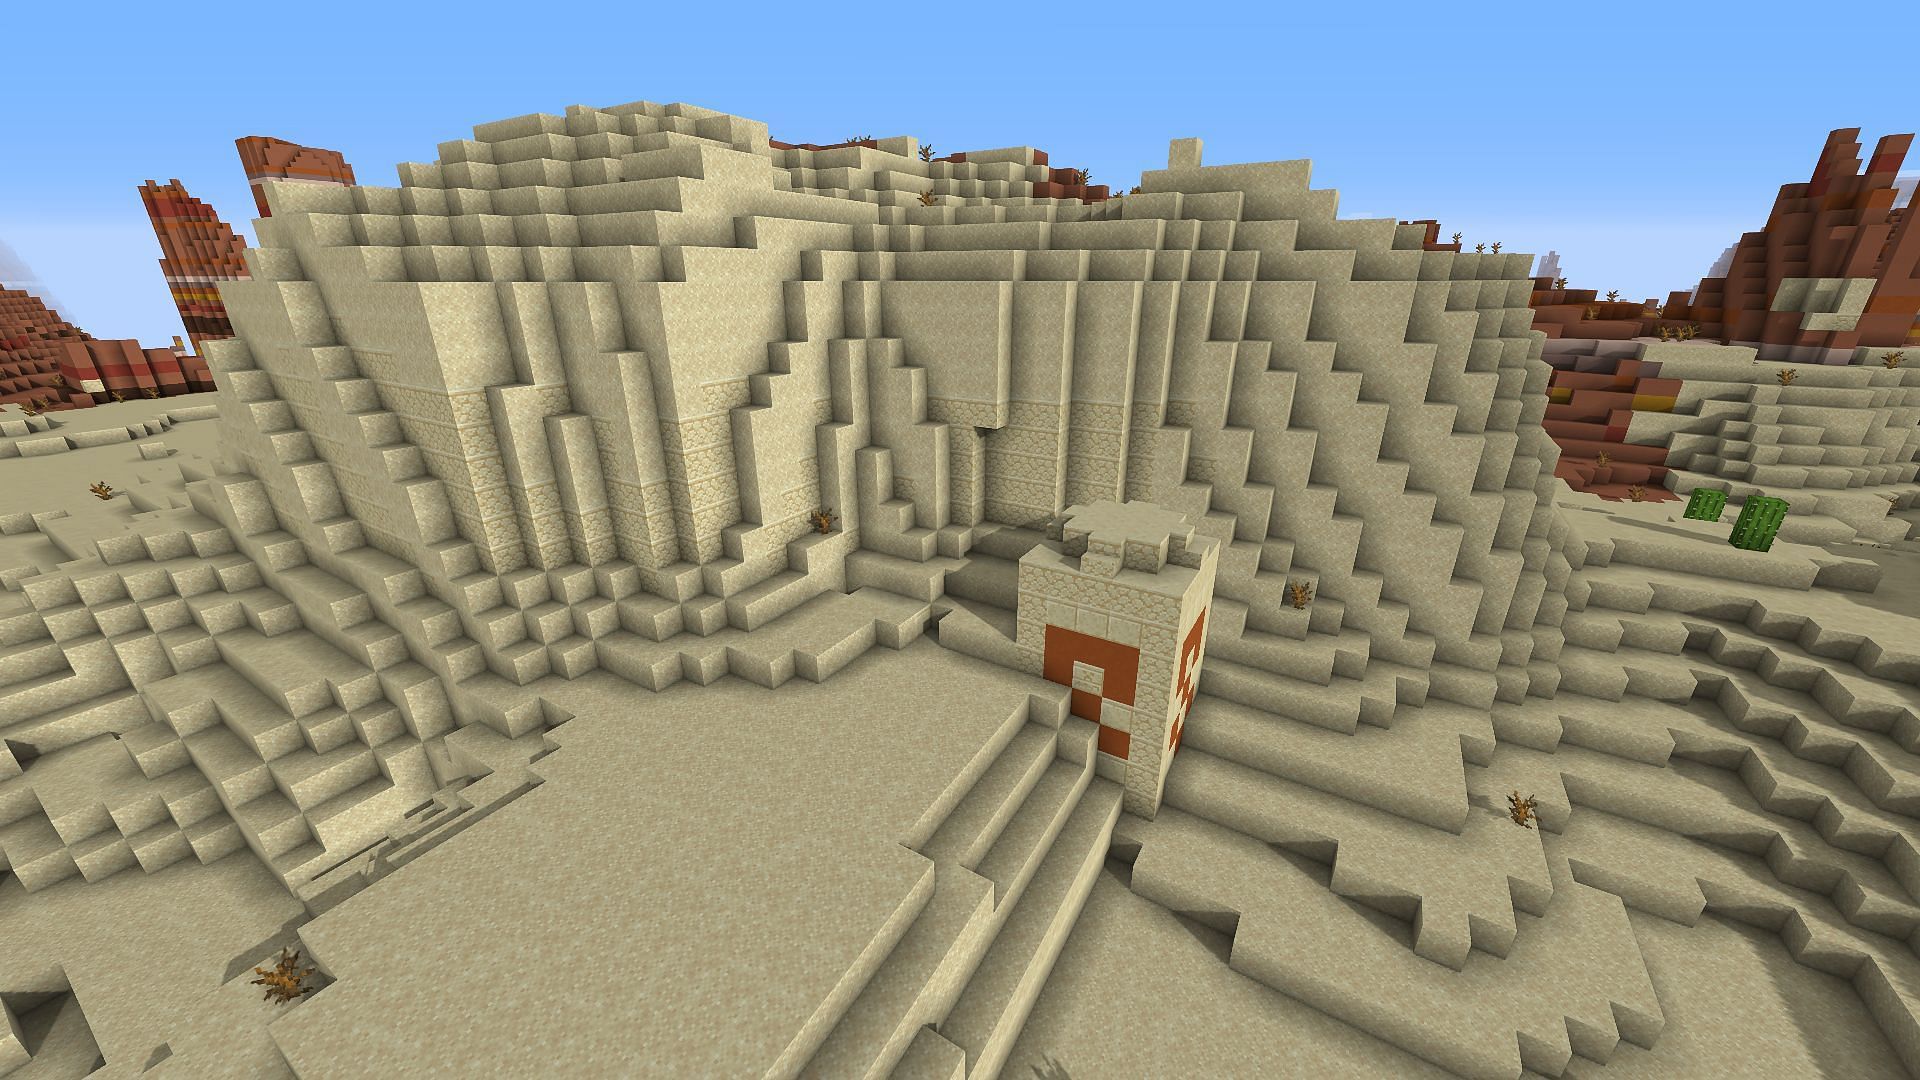 The mostly buried desert temple found in the seed near the spawn (Image via Minecraft/Mojang)